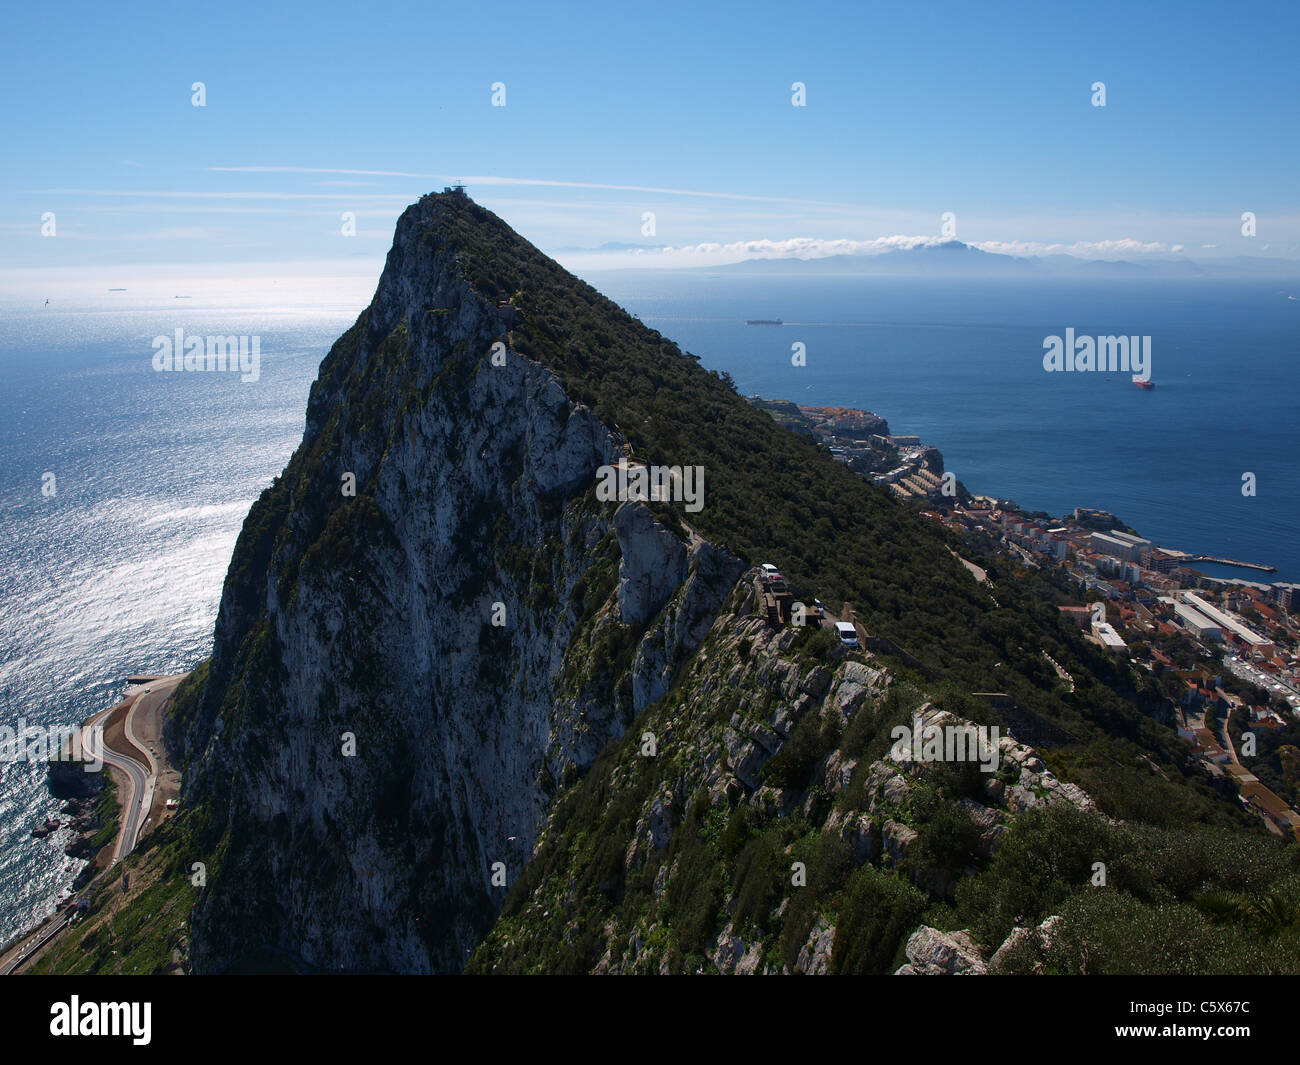 The famous Gibraltar rock and sea. Stock Photo